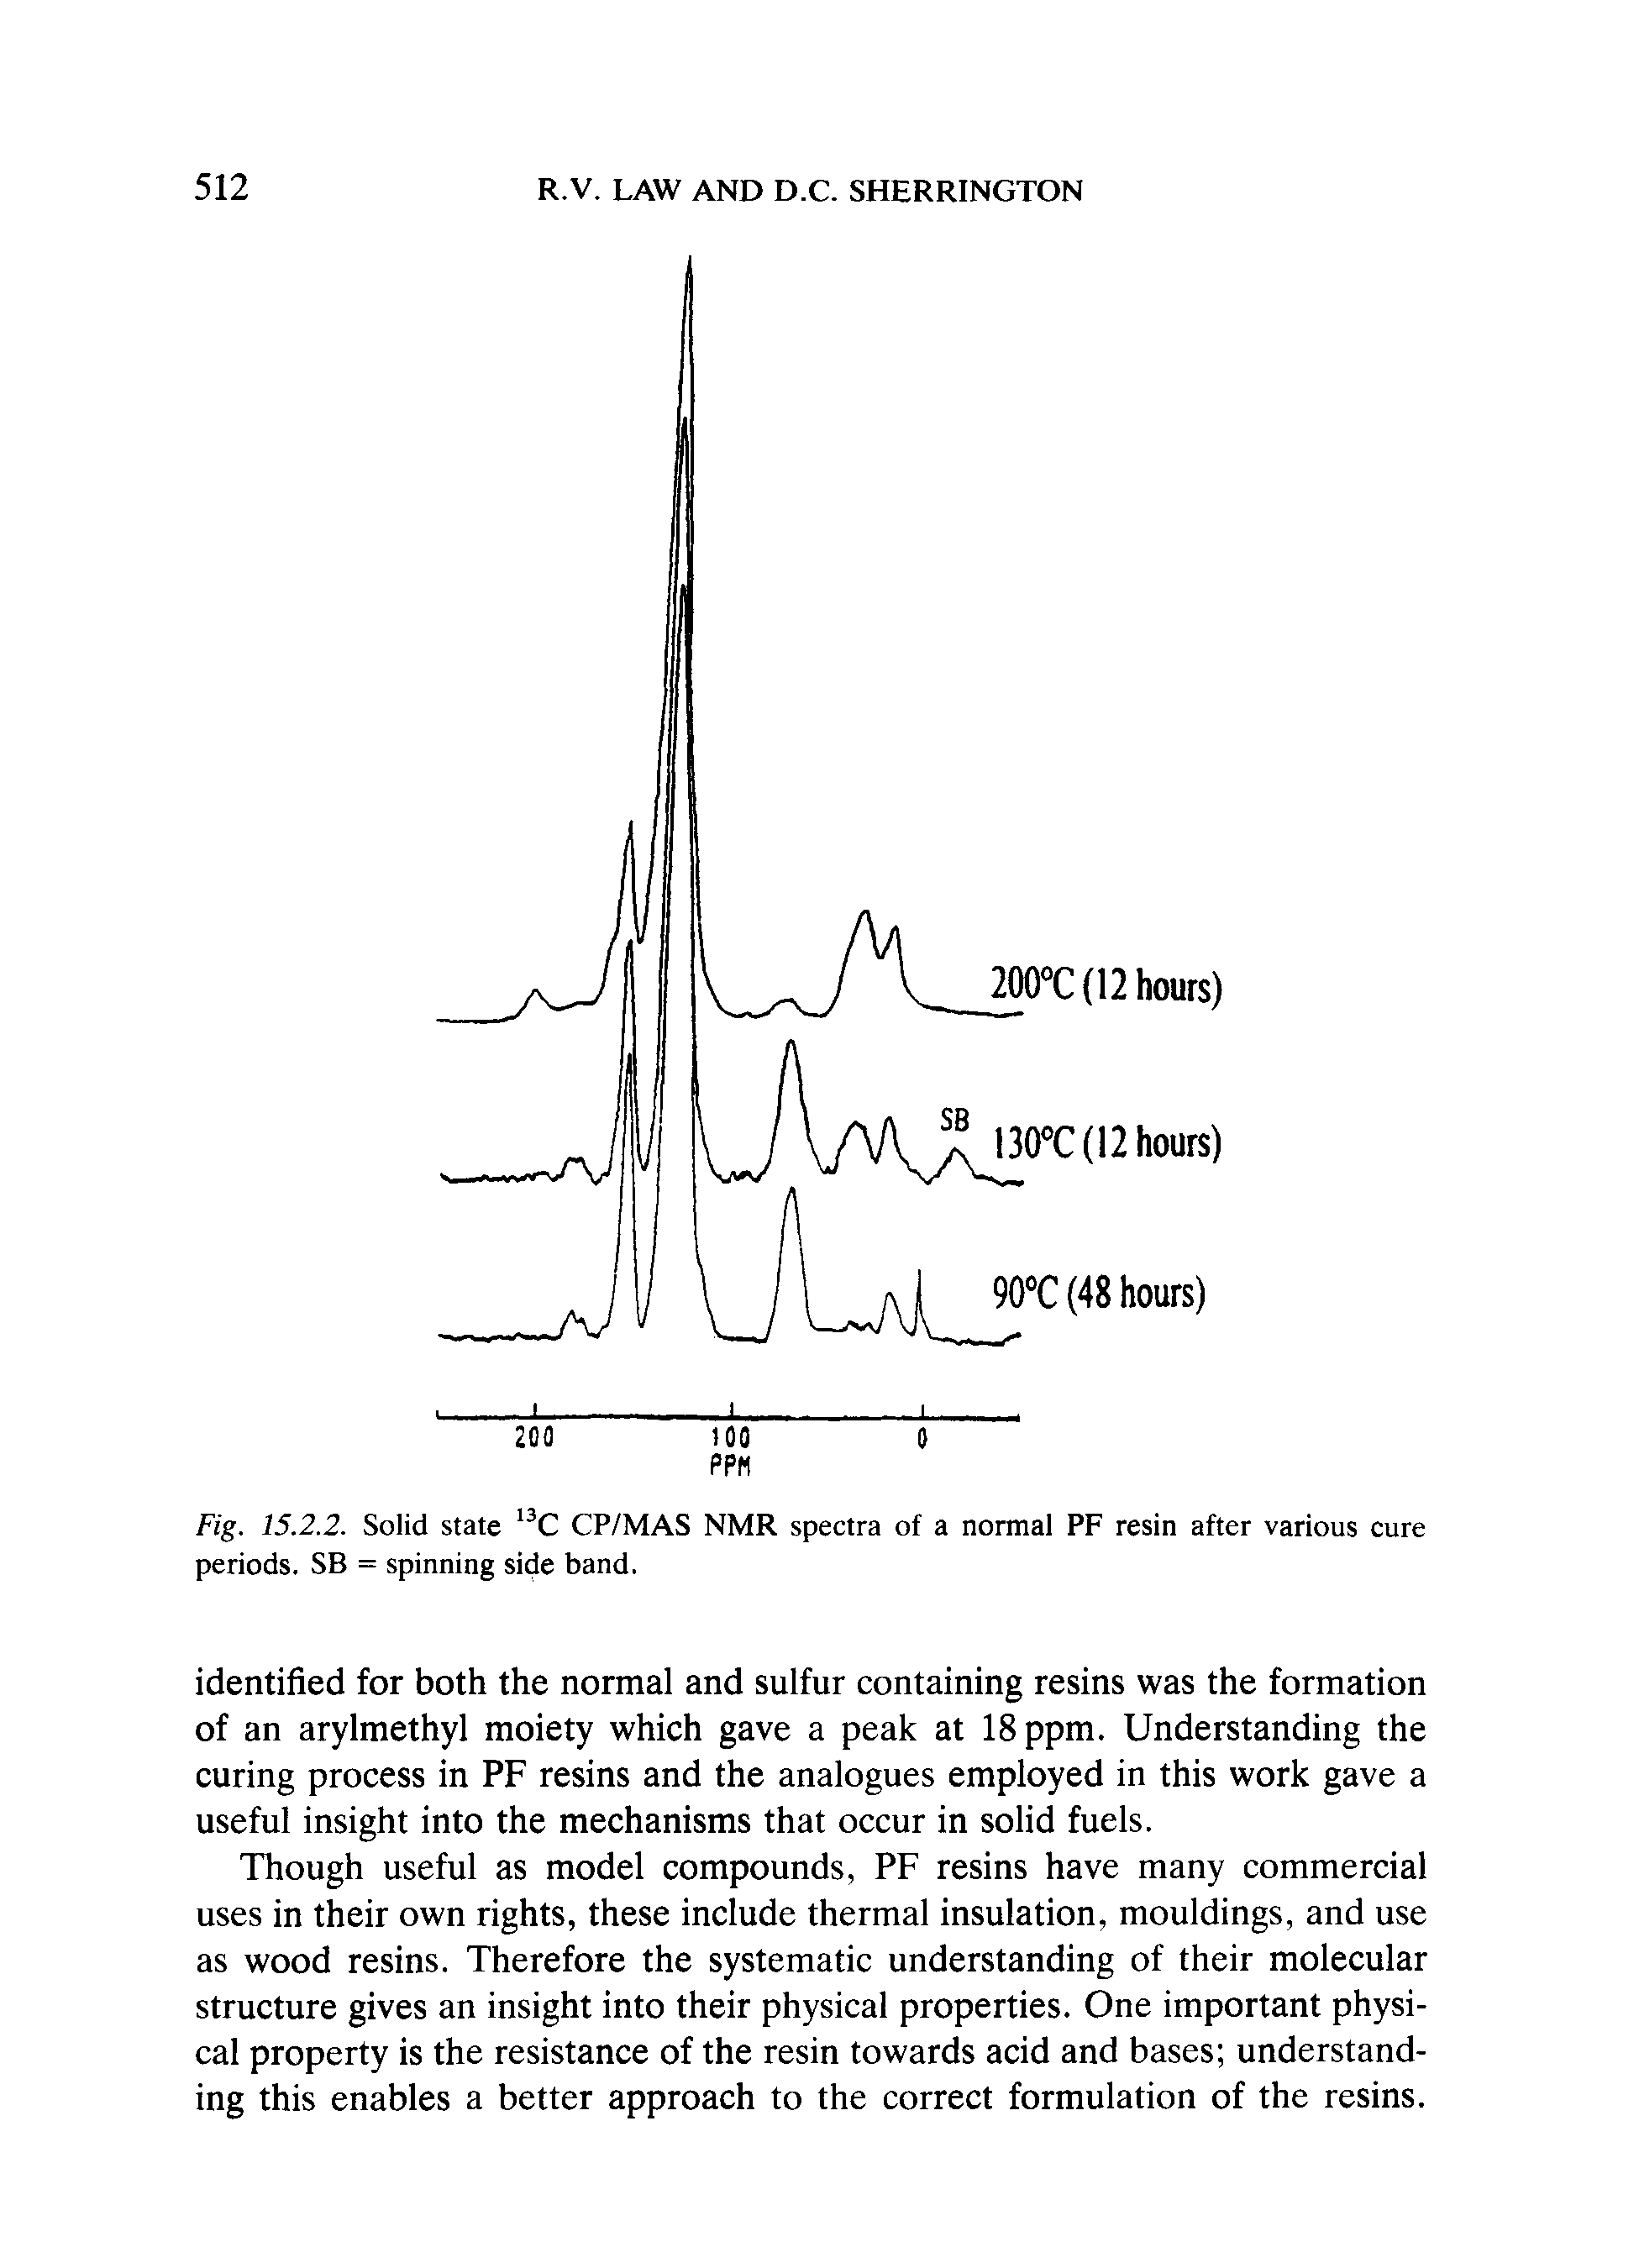 Fig. 15.2.2. Solid state CP/MAS NMR spectra of a normal PF resin after various cure periods. SB = spinning side band.